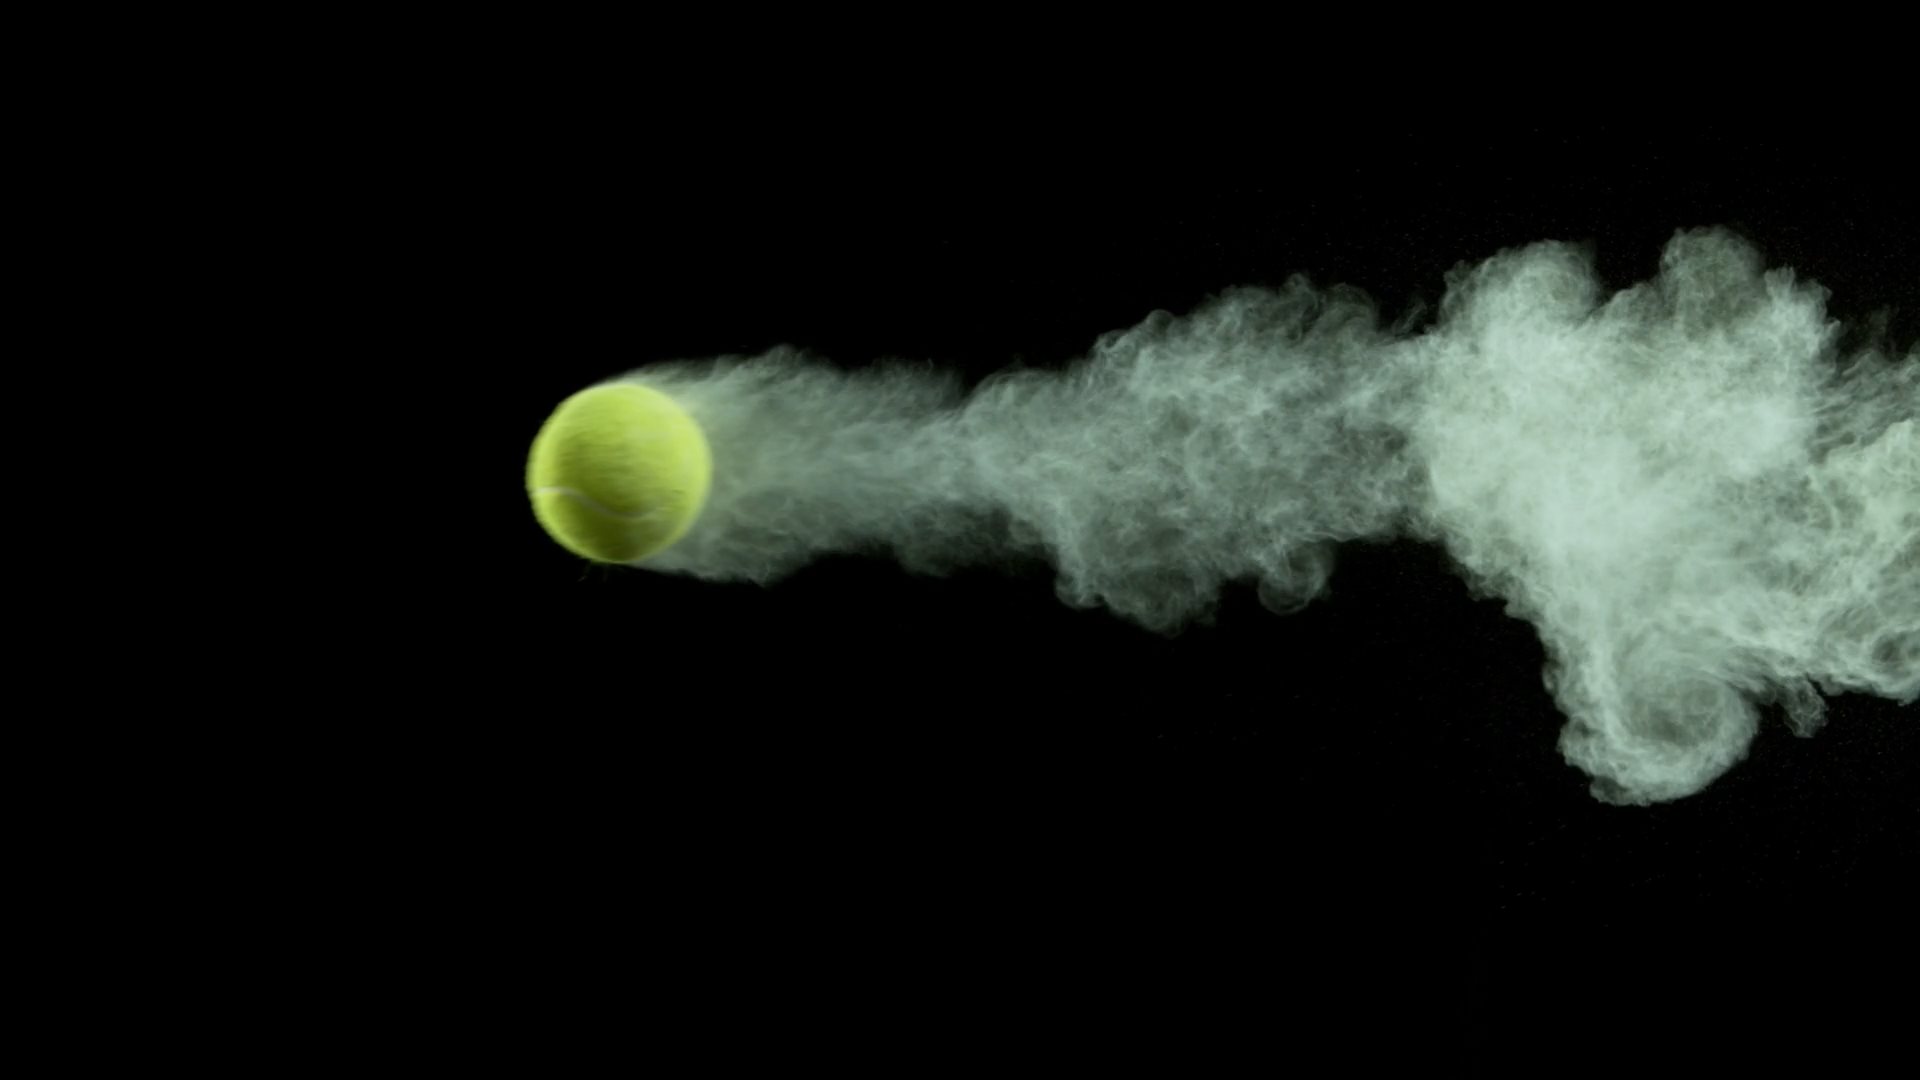 Video of a tennis ball shooting by